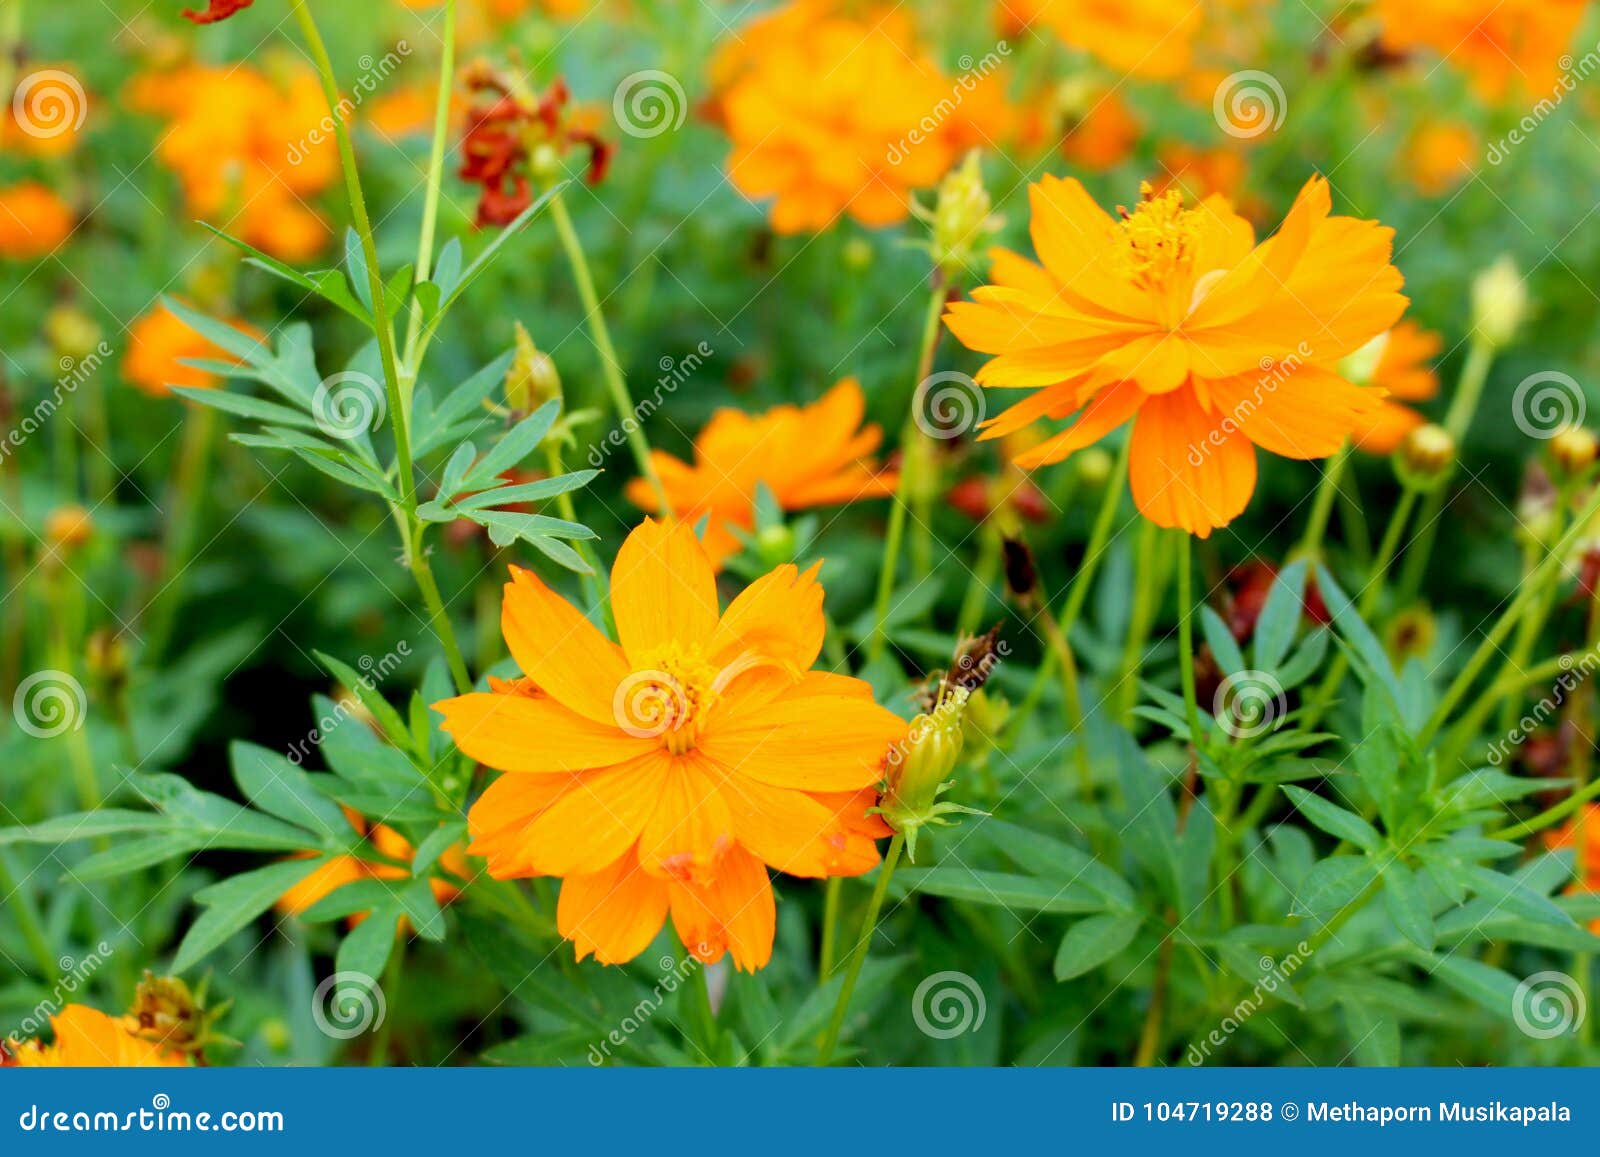 Download Sulfur Cosmos Orange Or Yellow Cosmos Is A Yellow Flower Can Be Used As A Background Image Stock Photo Image Of Bangkok Fresh 104719288 PSD Mockup Templates